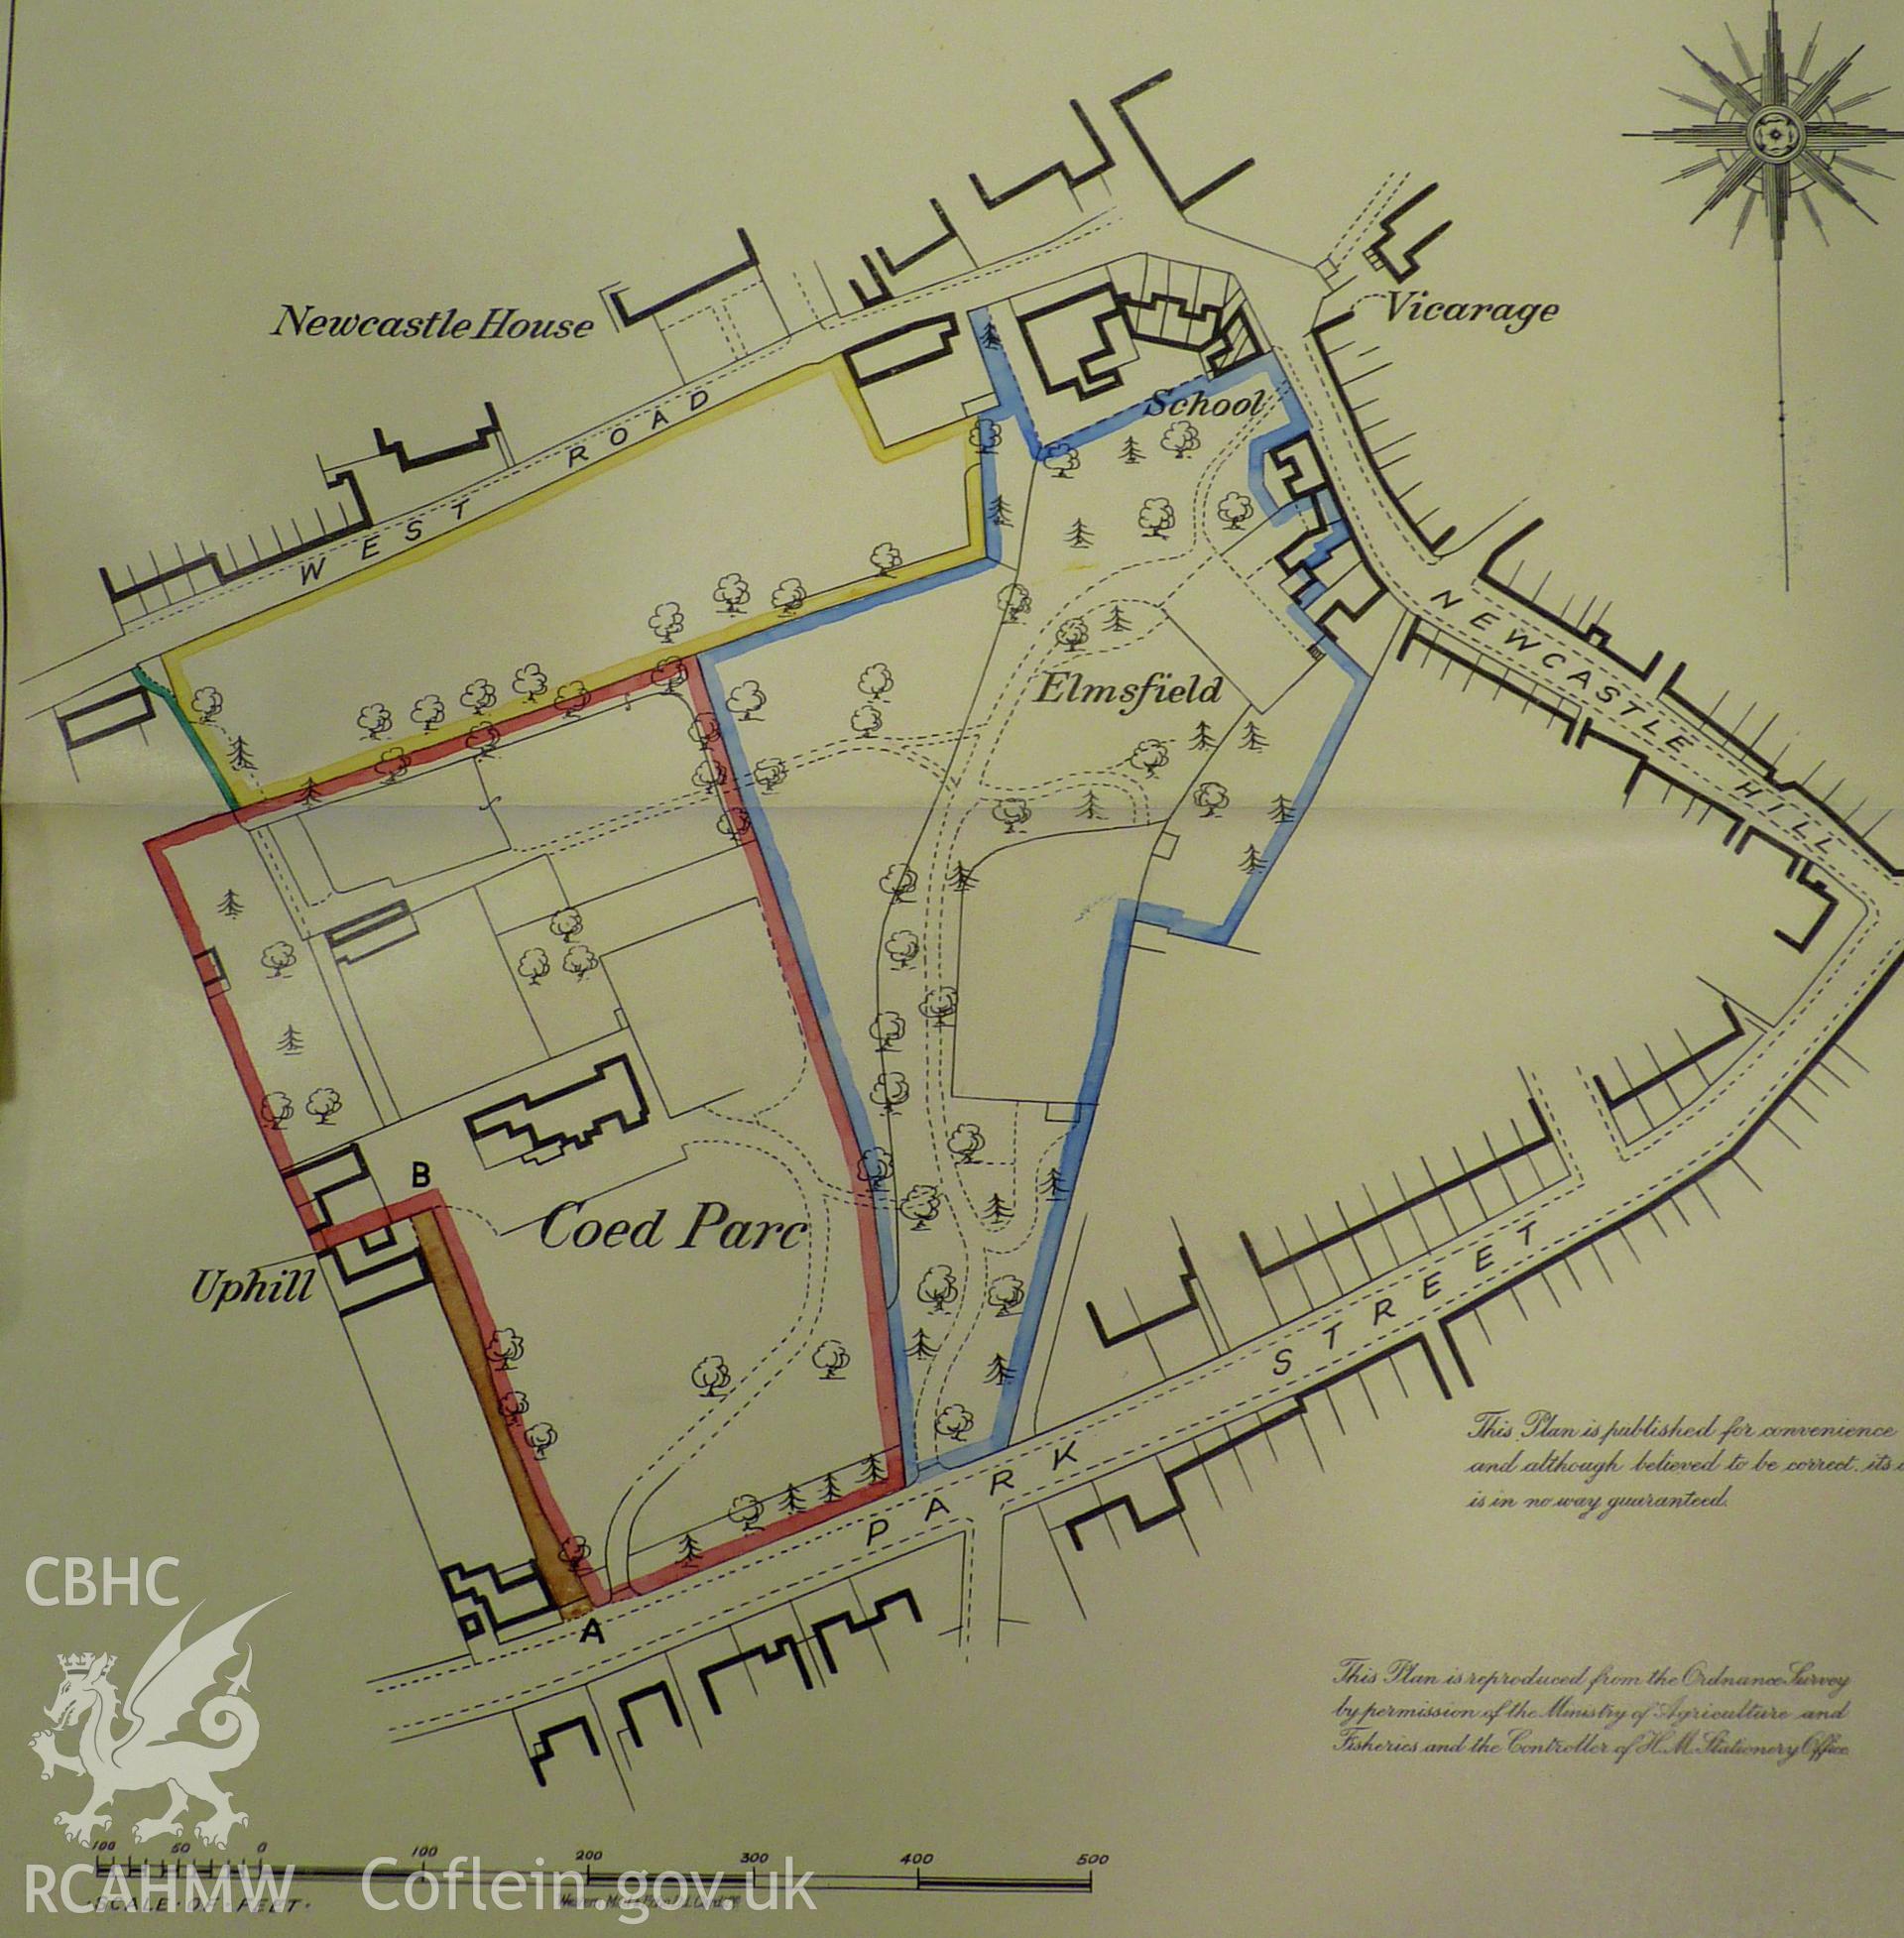 Sale Plan of Coed Park from 1938. Associated with archaeological work carried out at Coed Parc, Newcastle, Bridgend, by Archaeology Wales, 2016.